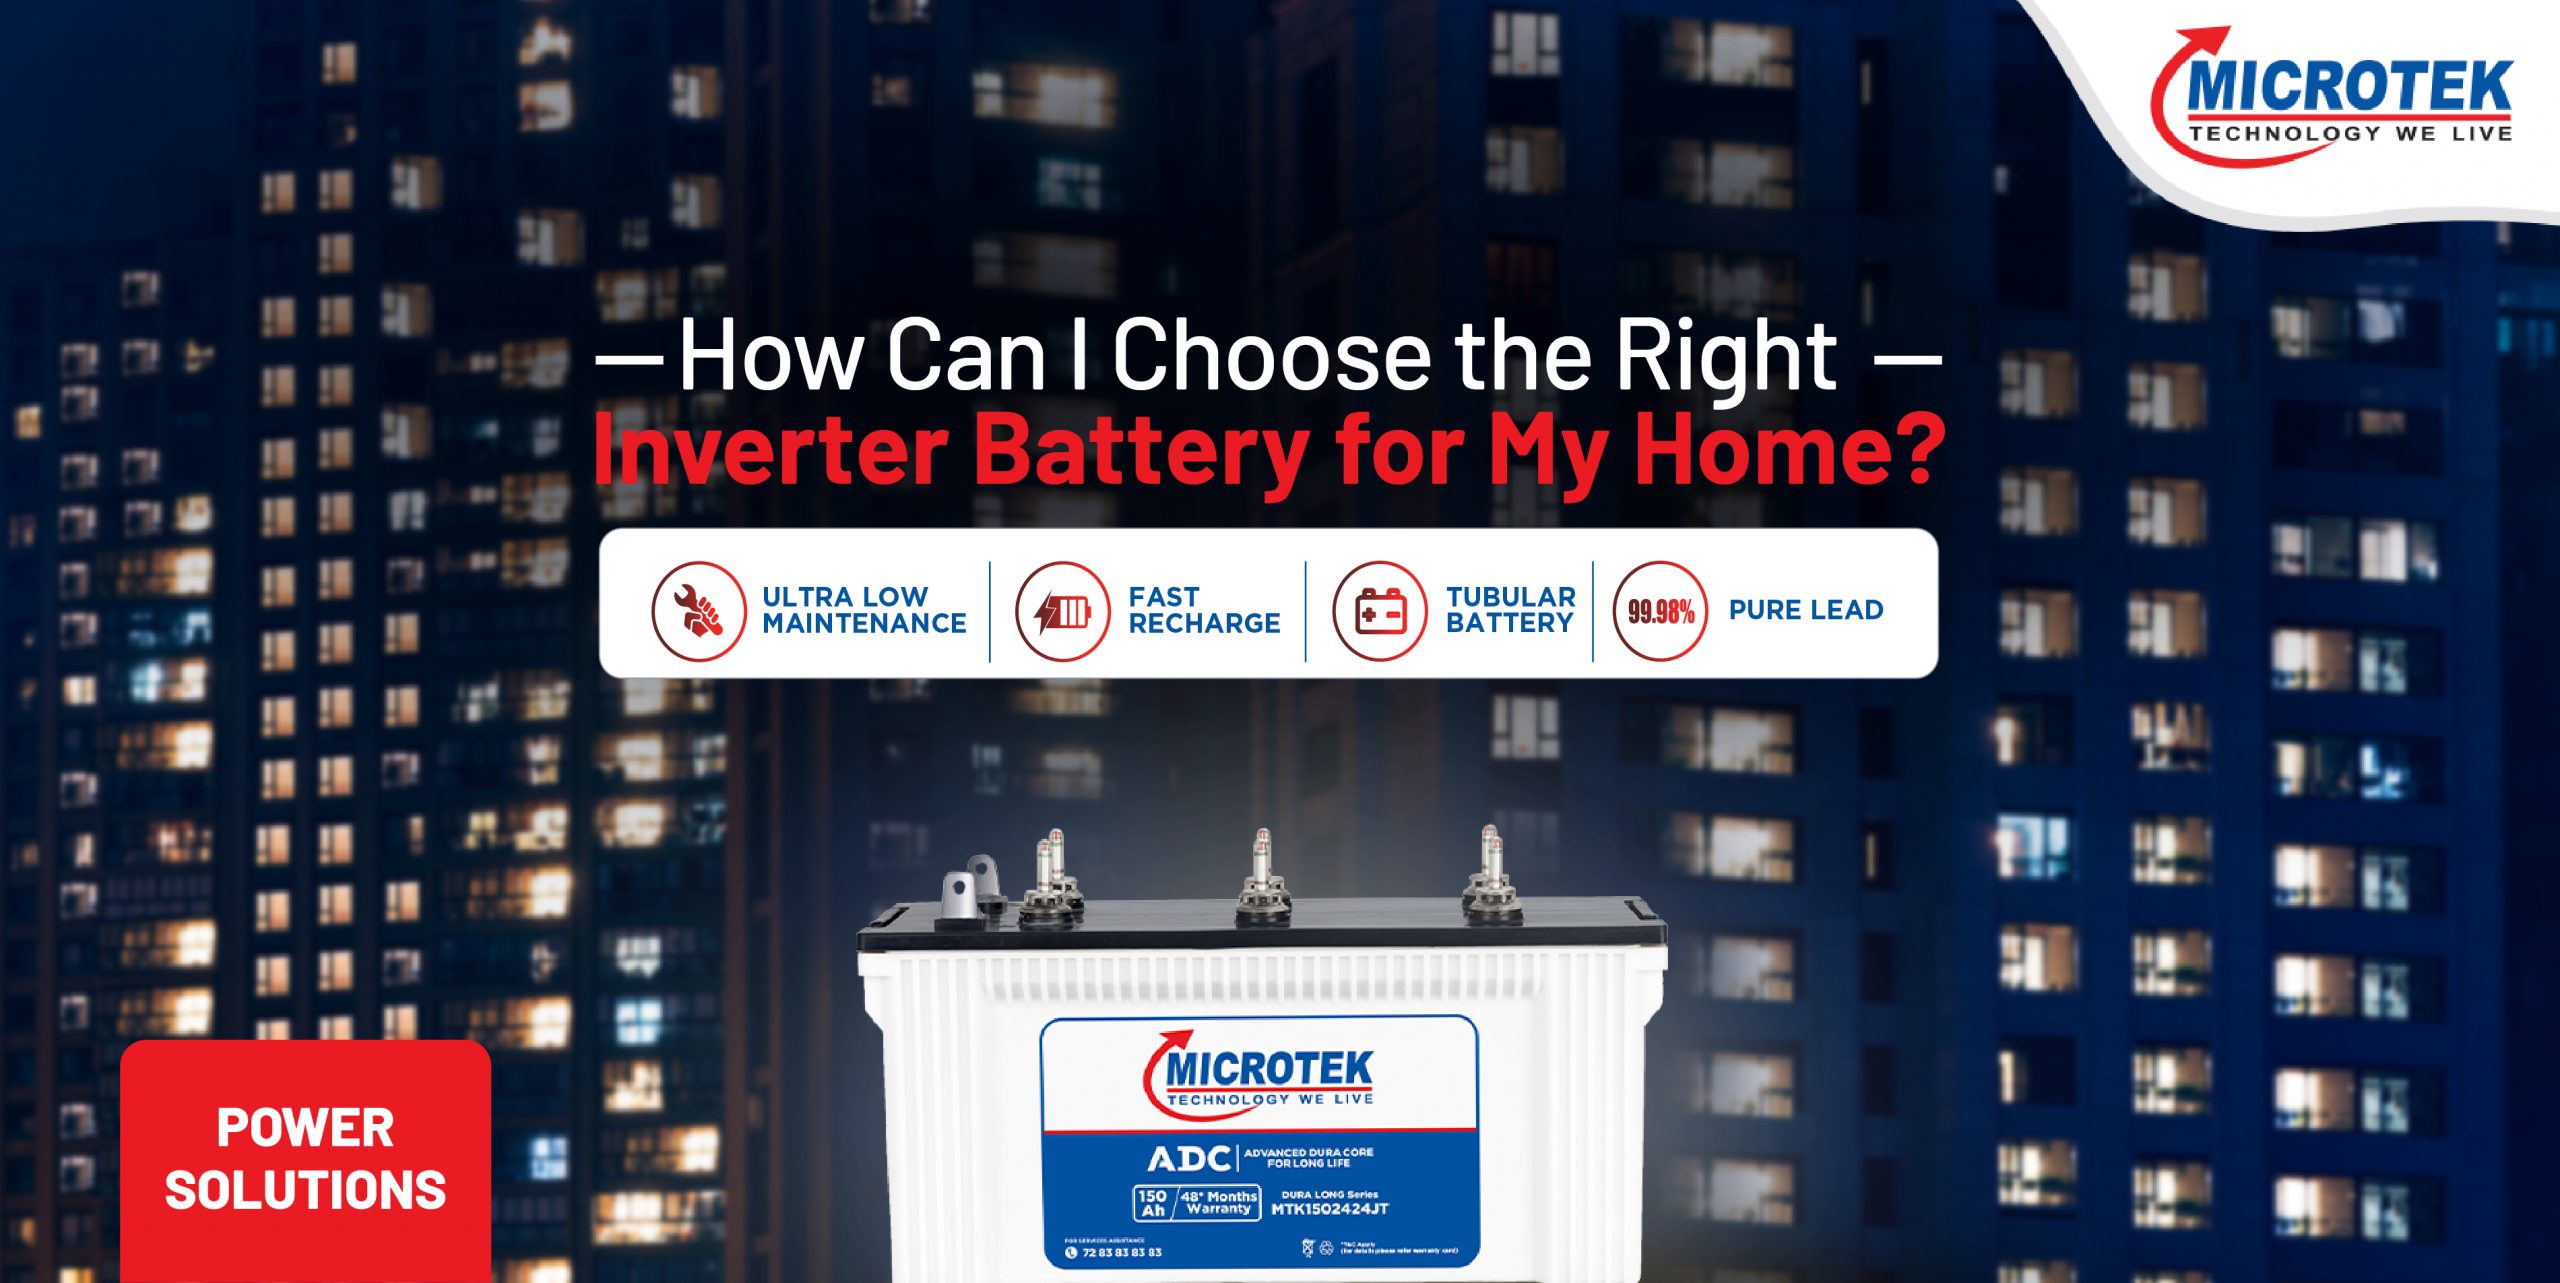 How Can I Choose the Right Inverter Battery for My Home?